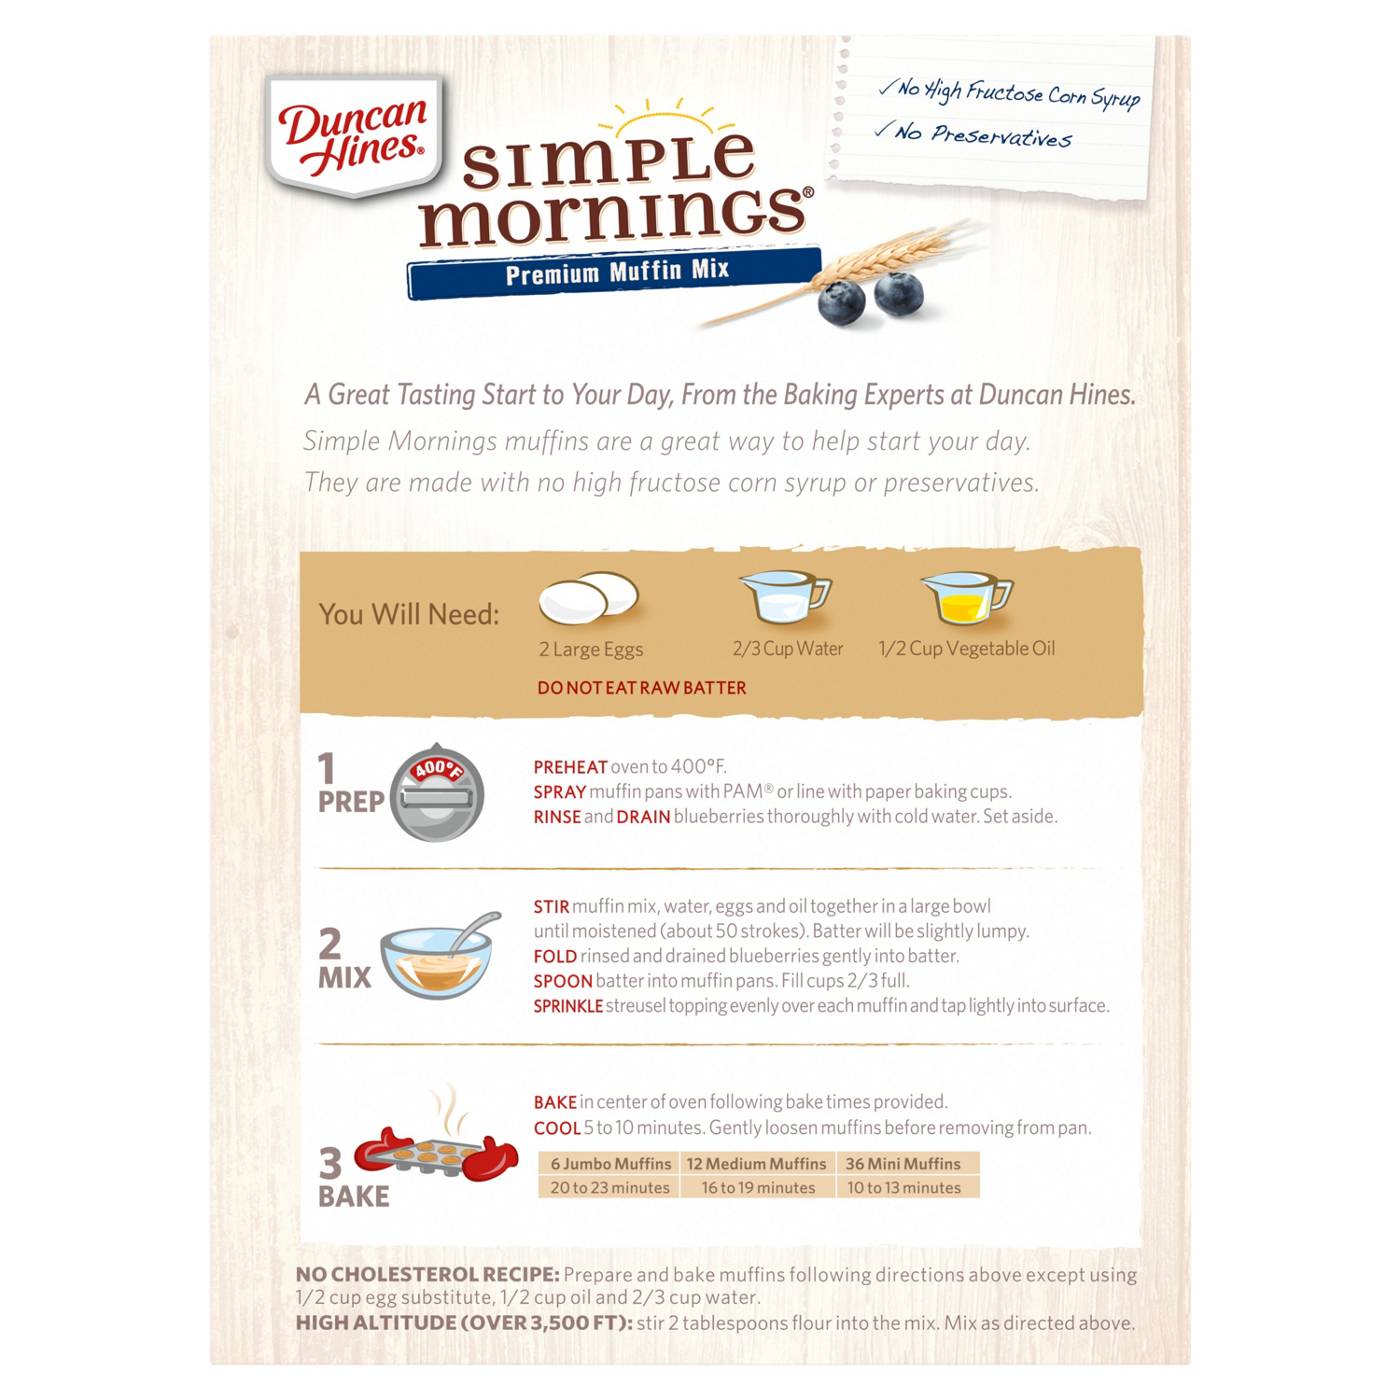 Duncan Hines Simple Mornings Blueberry Streusel Premium Muffin Mix; image 4 of 7